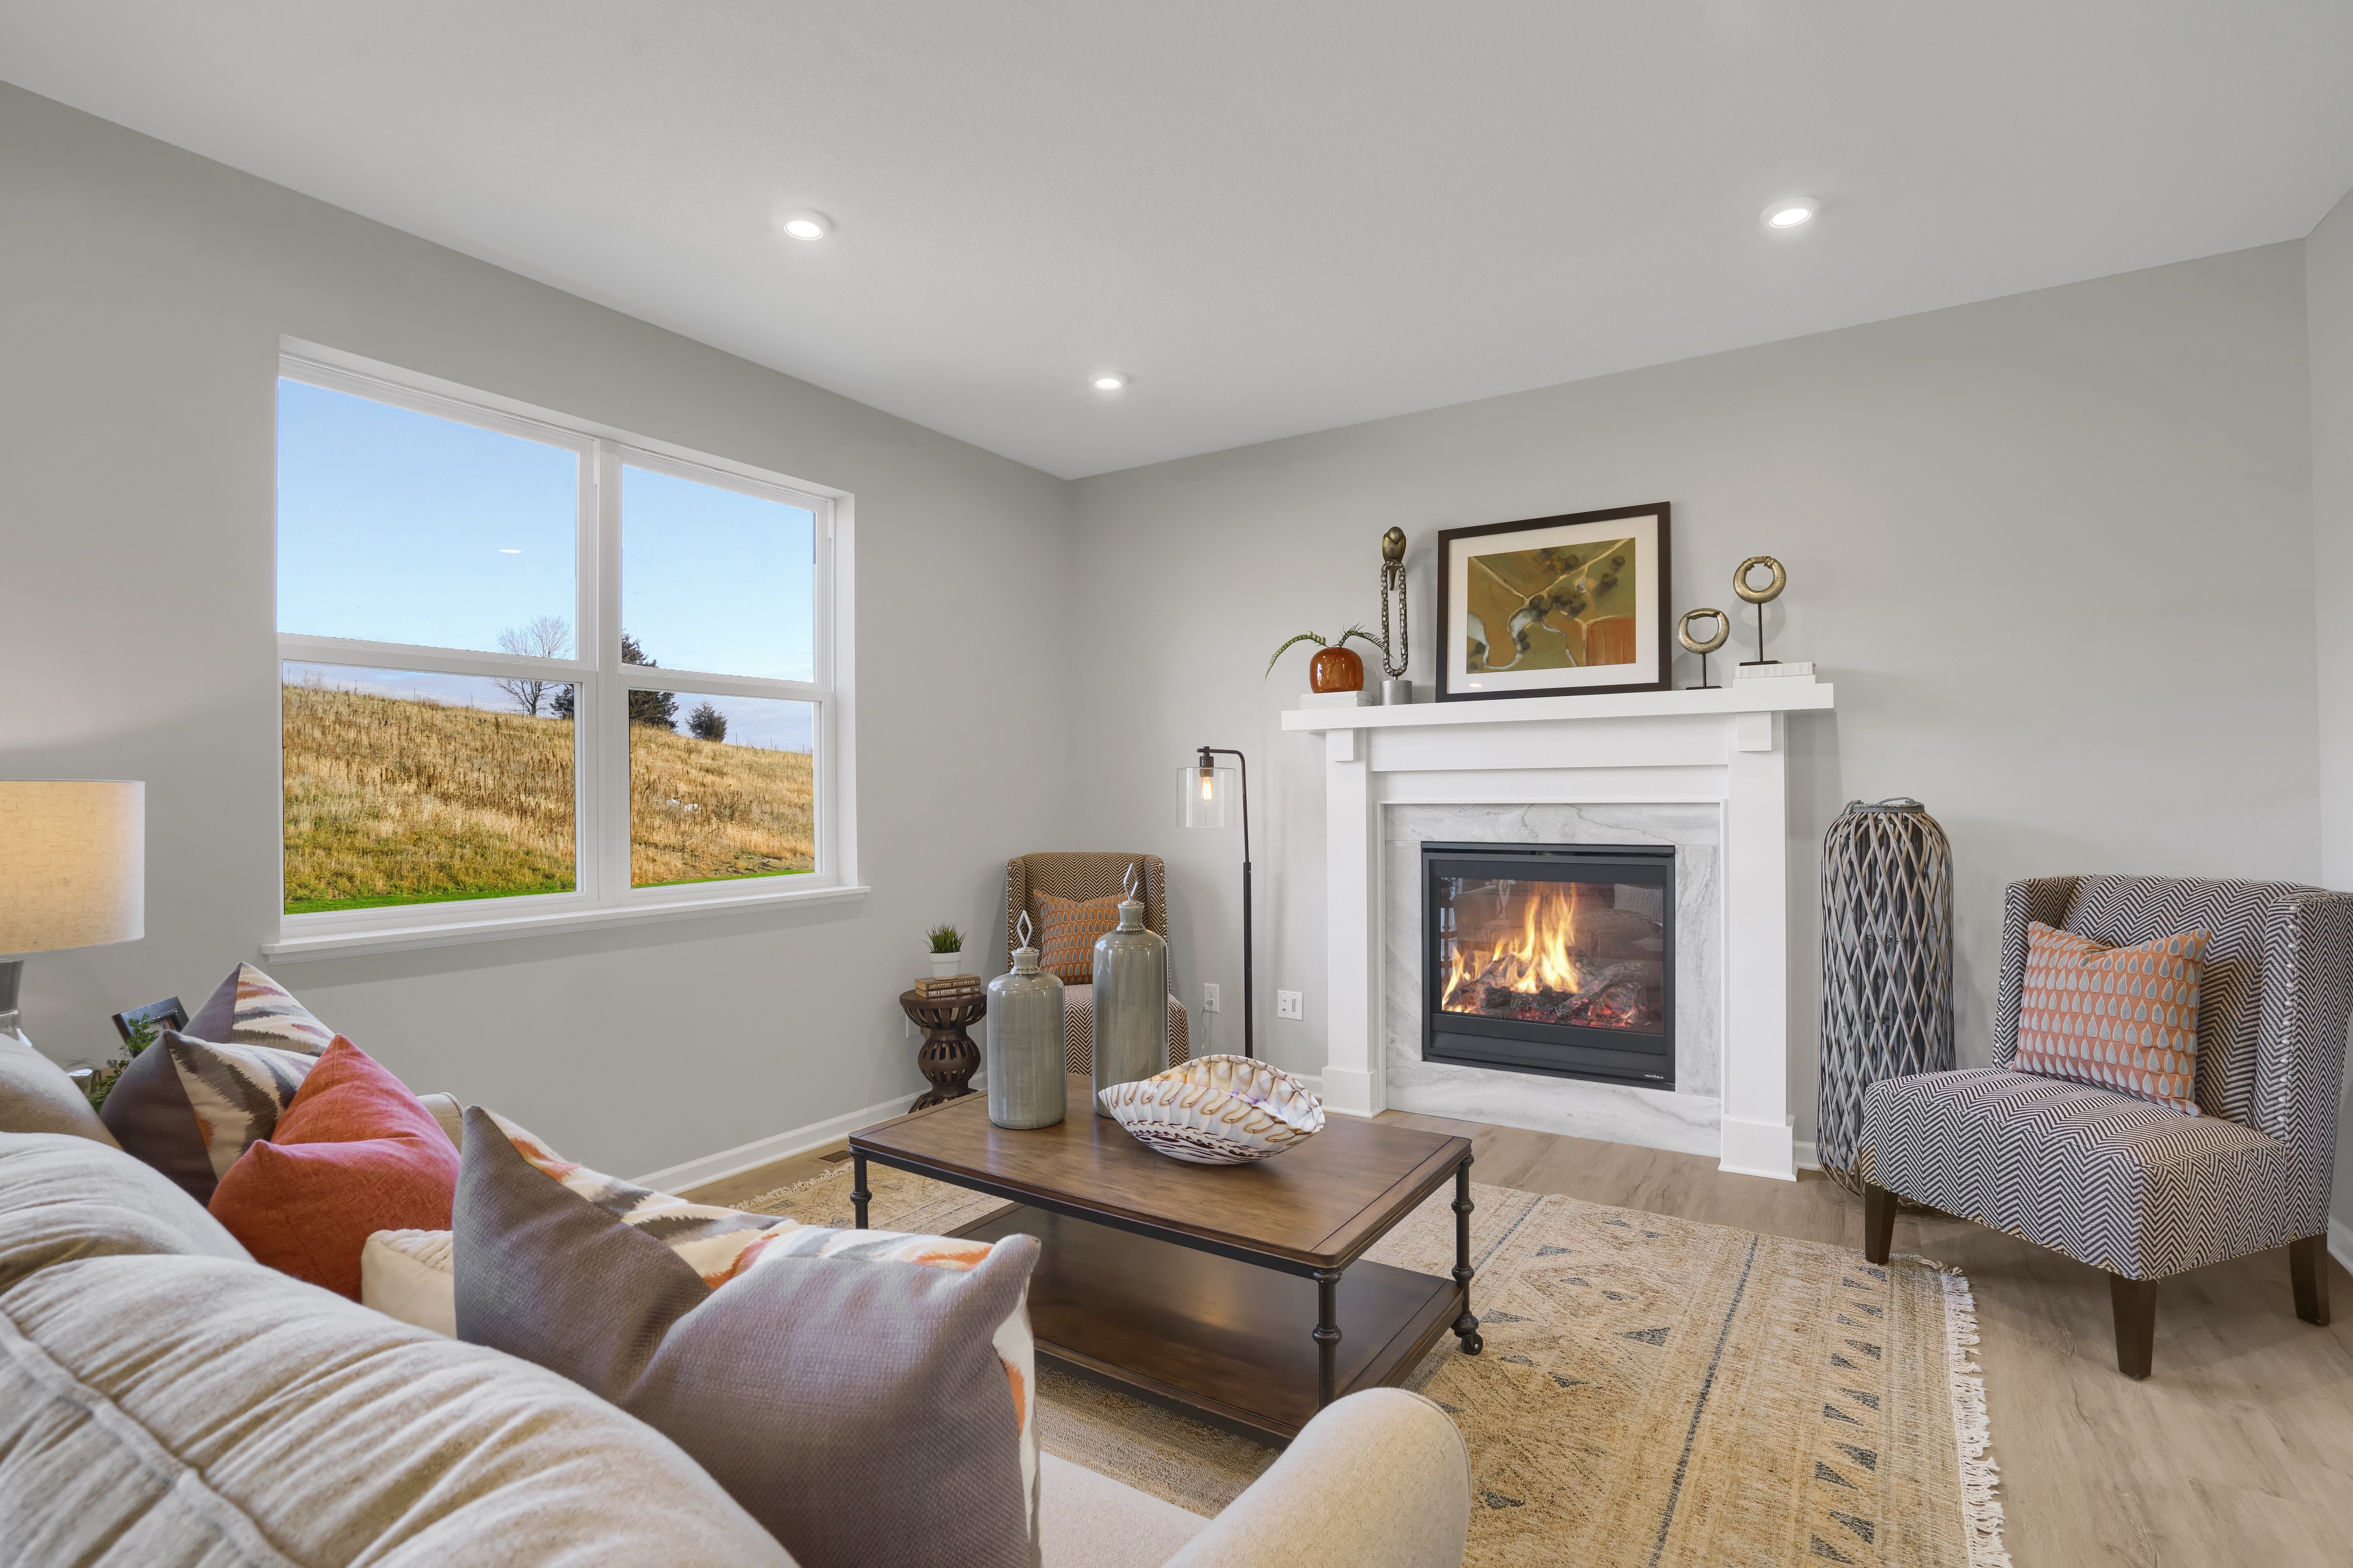 Staged Living Room With Fireplace On